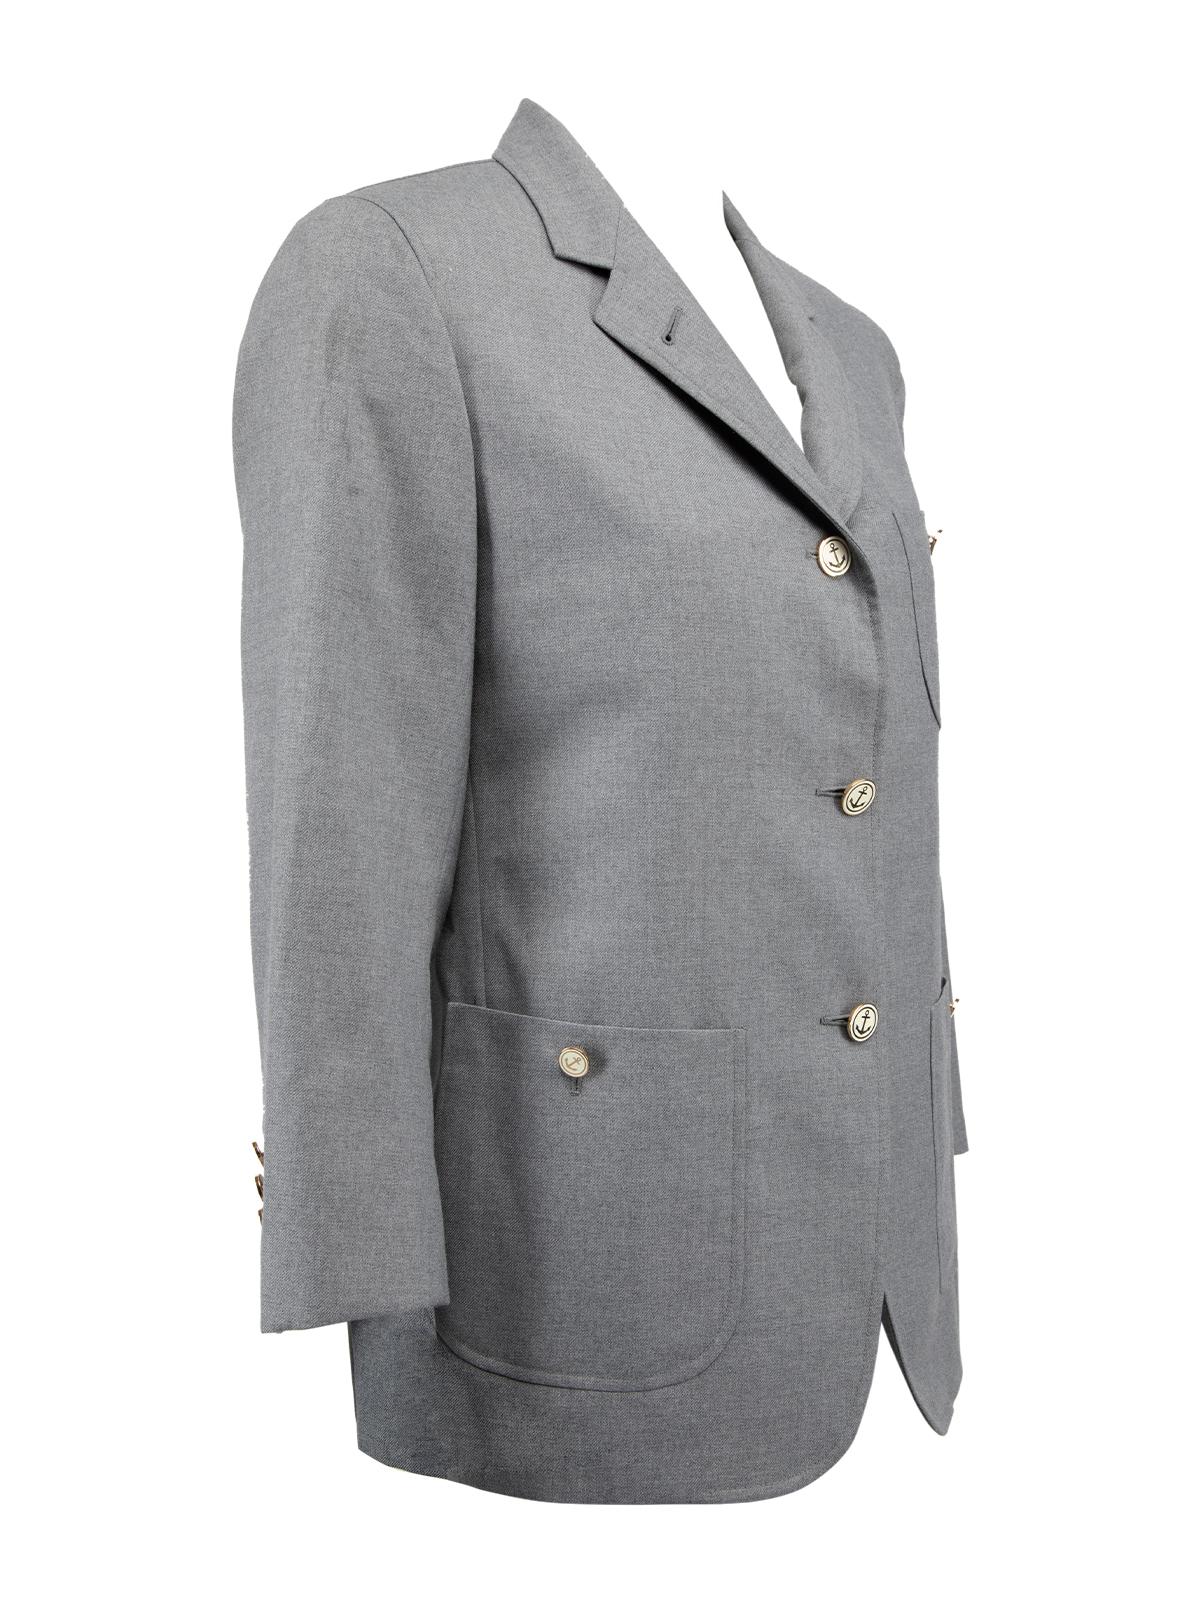 CONDITION is Never worn with tags. No wear and pilling to blazer is evident on this used Thom Browne designer resale item. Details Grey Polyester and wool Single breasted blazer Loose fit Long sleeve 2x exterior pockets 3x interior pockets Button